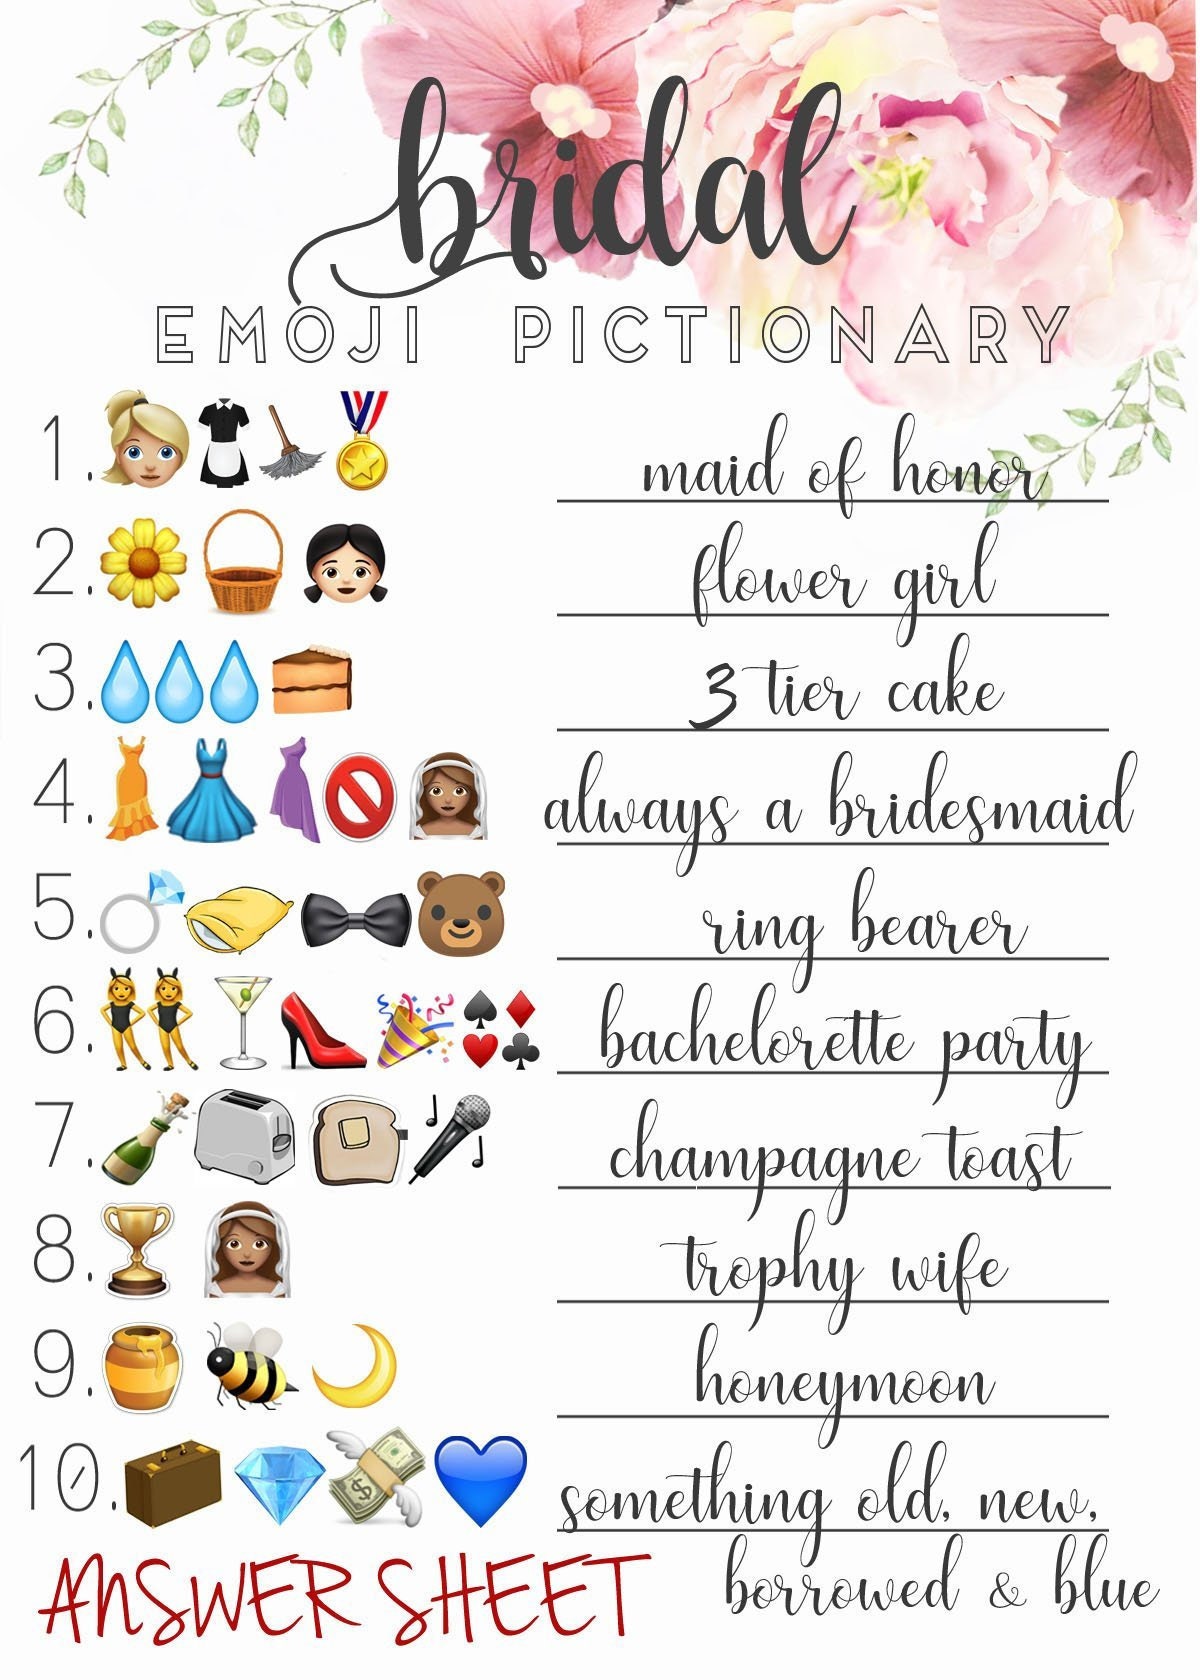 bridal-shower-emoji-pictionary-guessing-game-with-answer-key-etsy